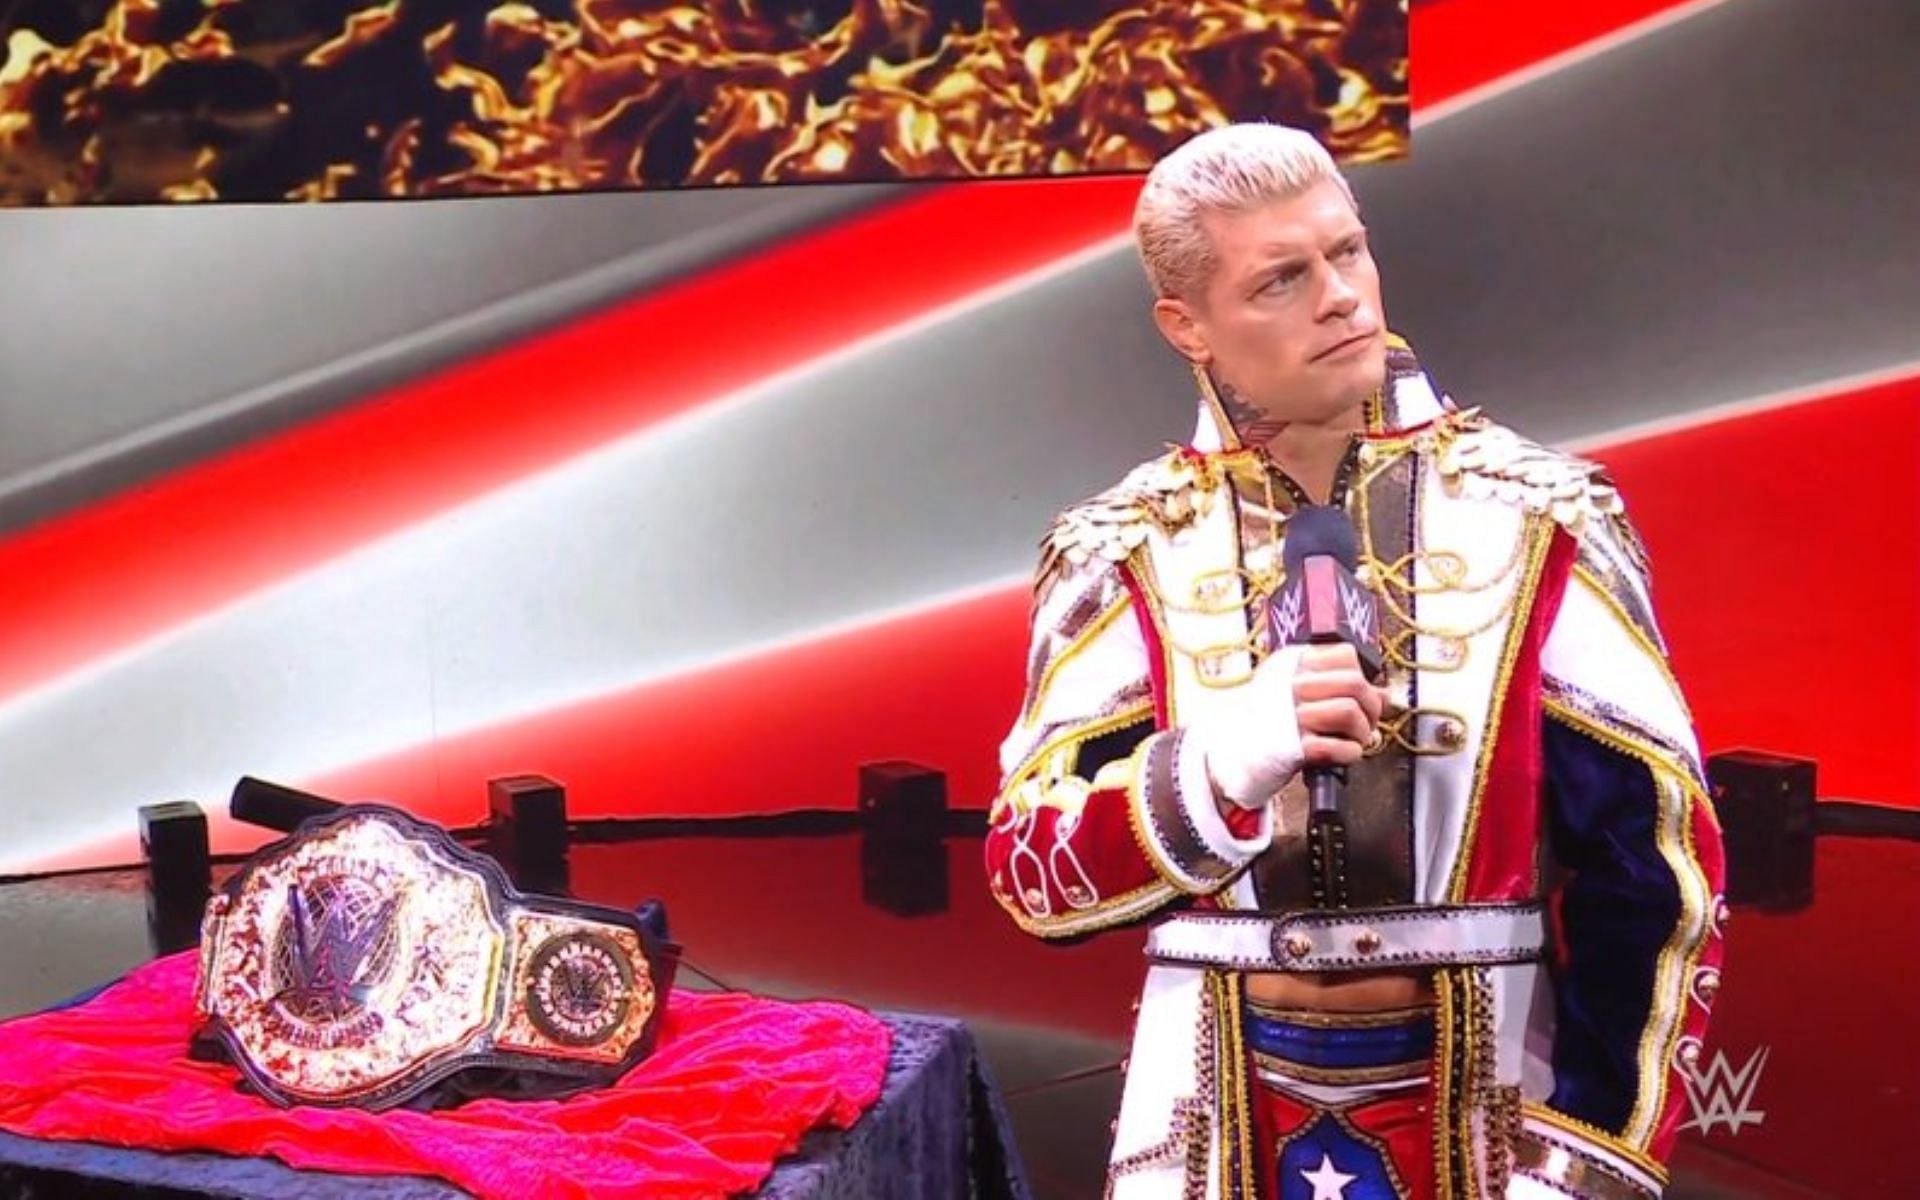 The American Nightmare kicked off the RAW after Backlash 2023